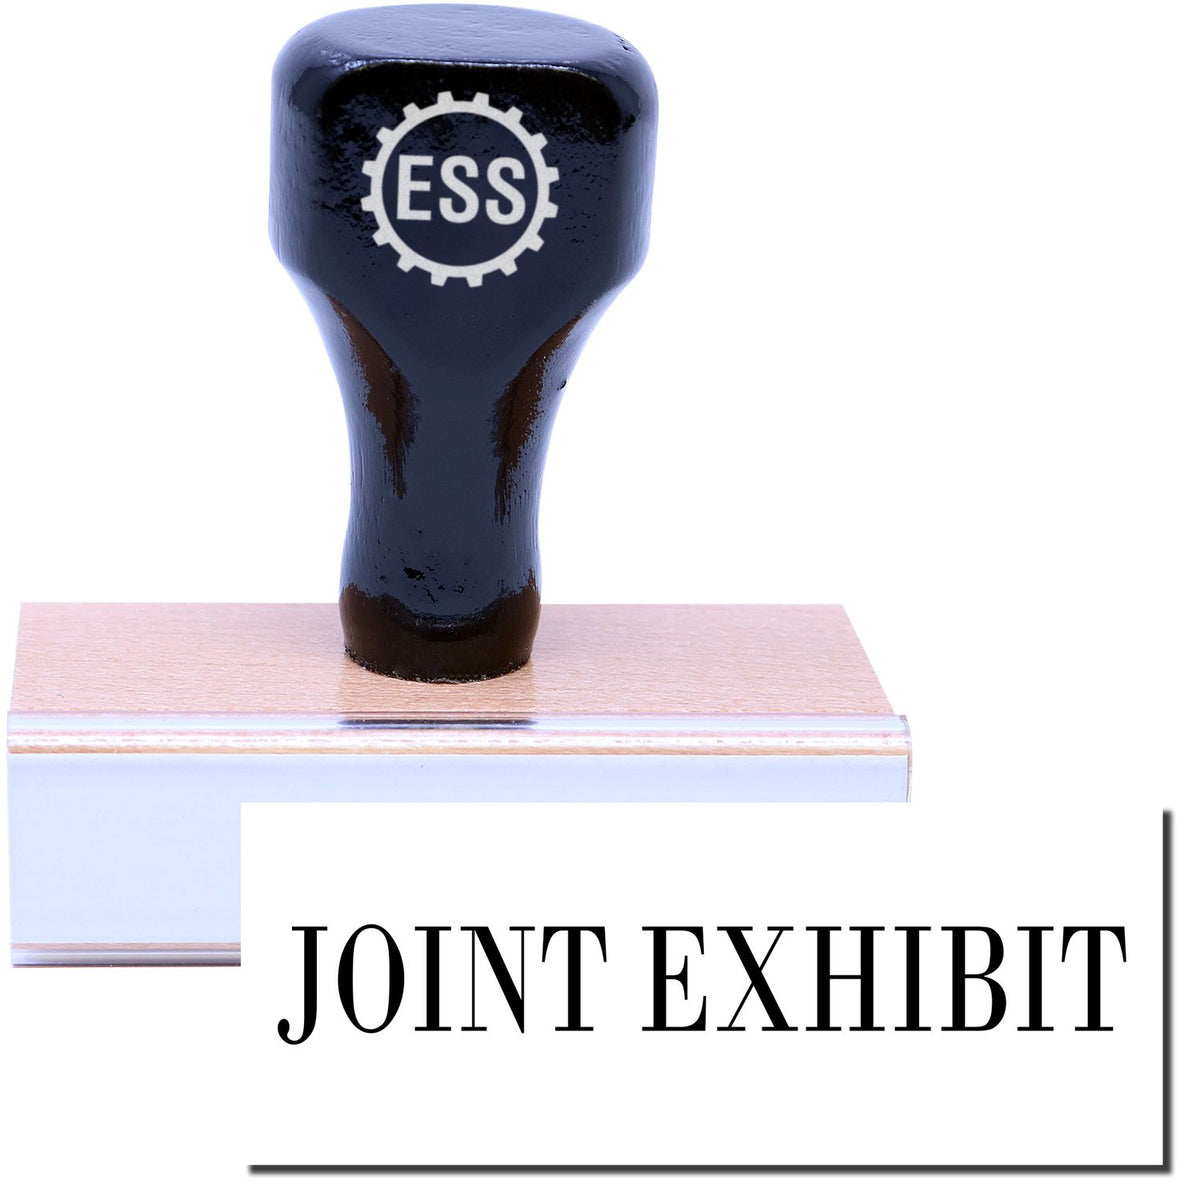 A stock office rubber stamp with a stamped image showing how the text &quot;JOINT EXHIBIT&quot; in a large font is displayed after stamping.